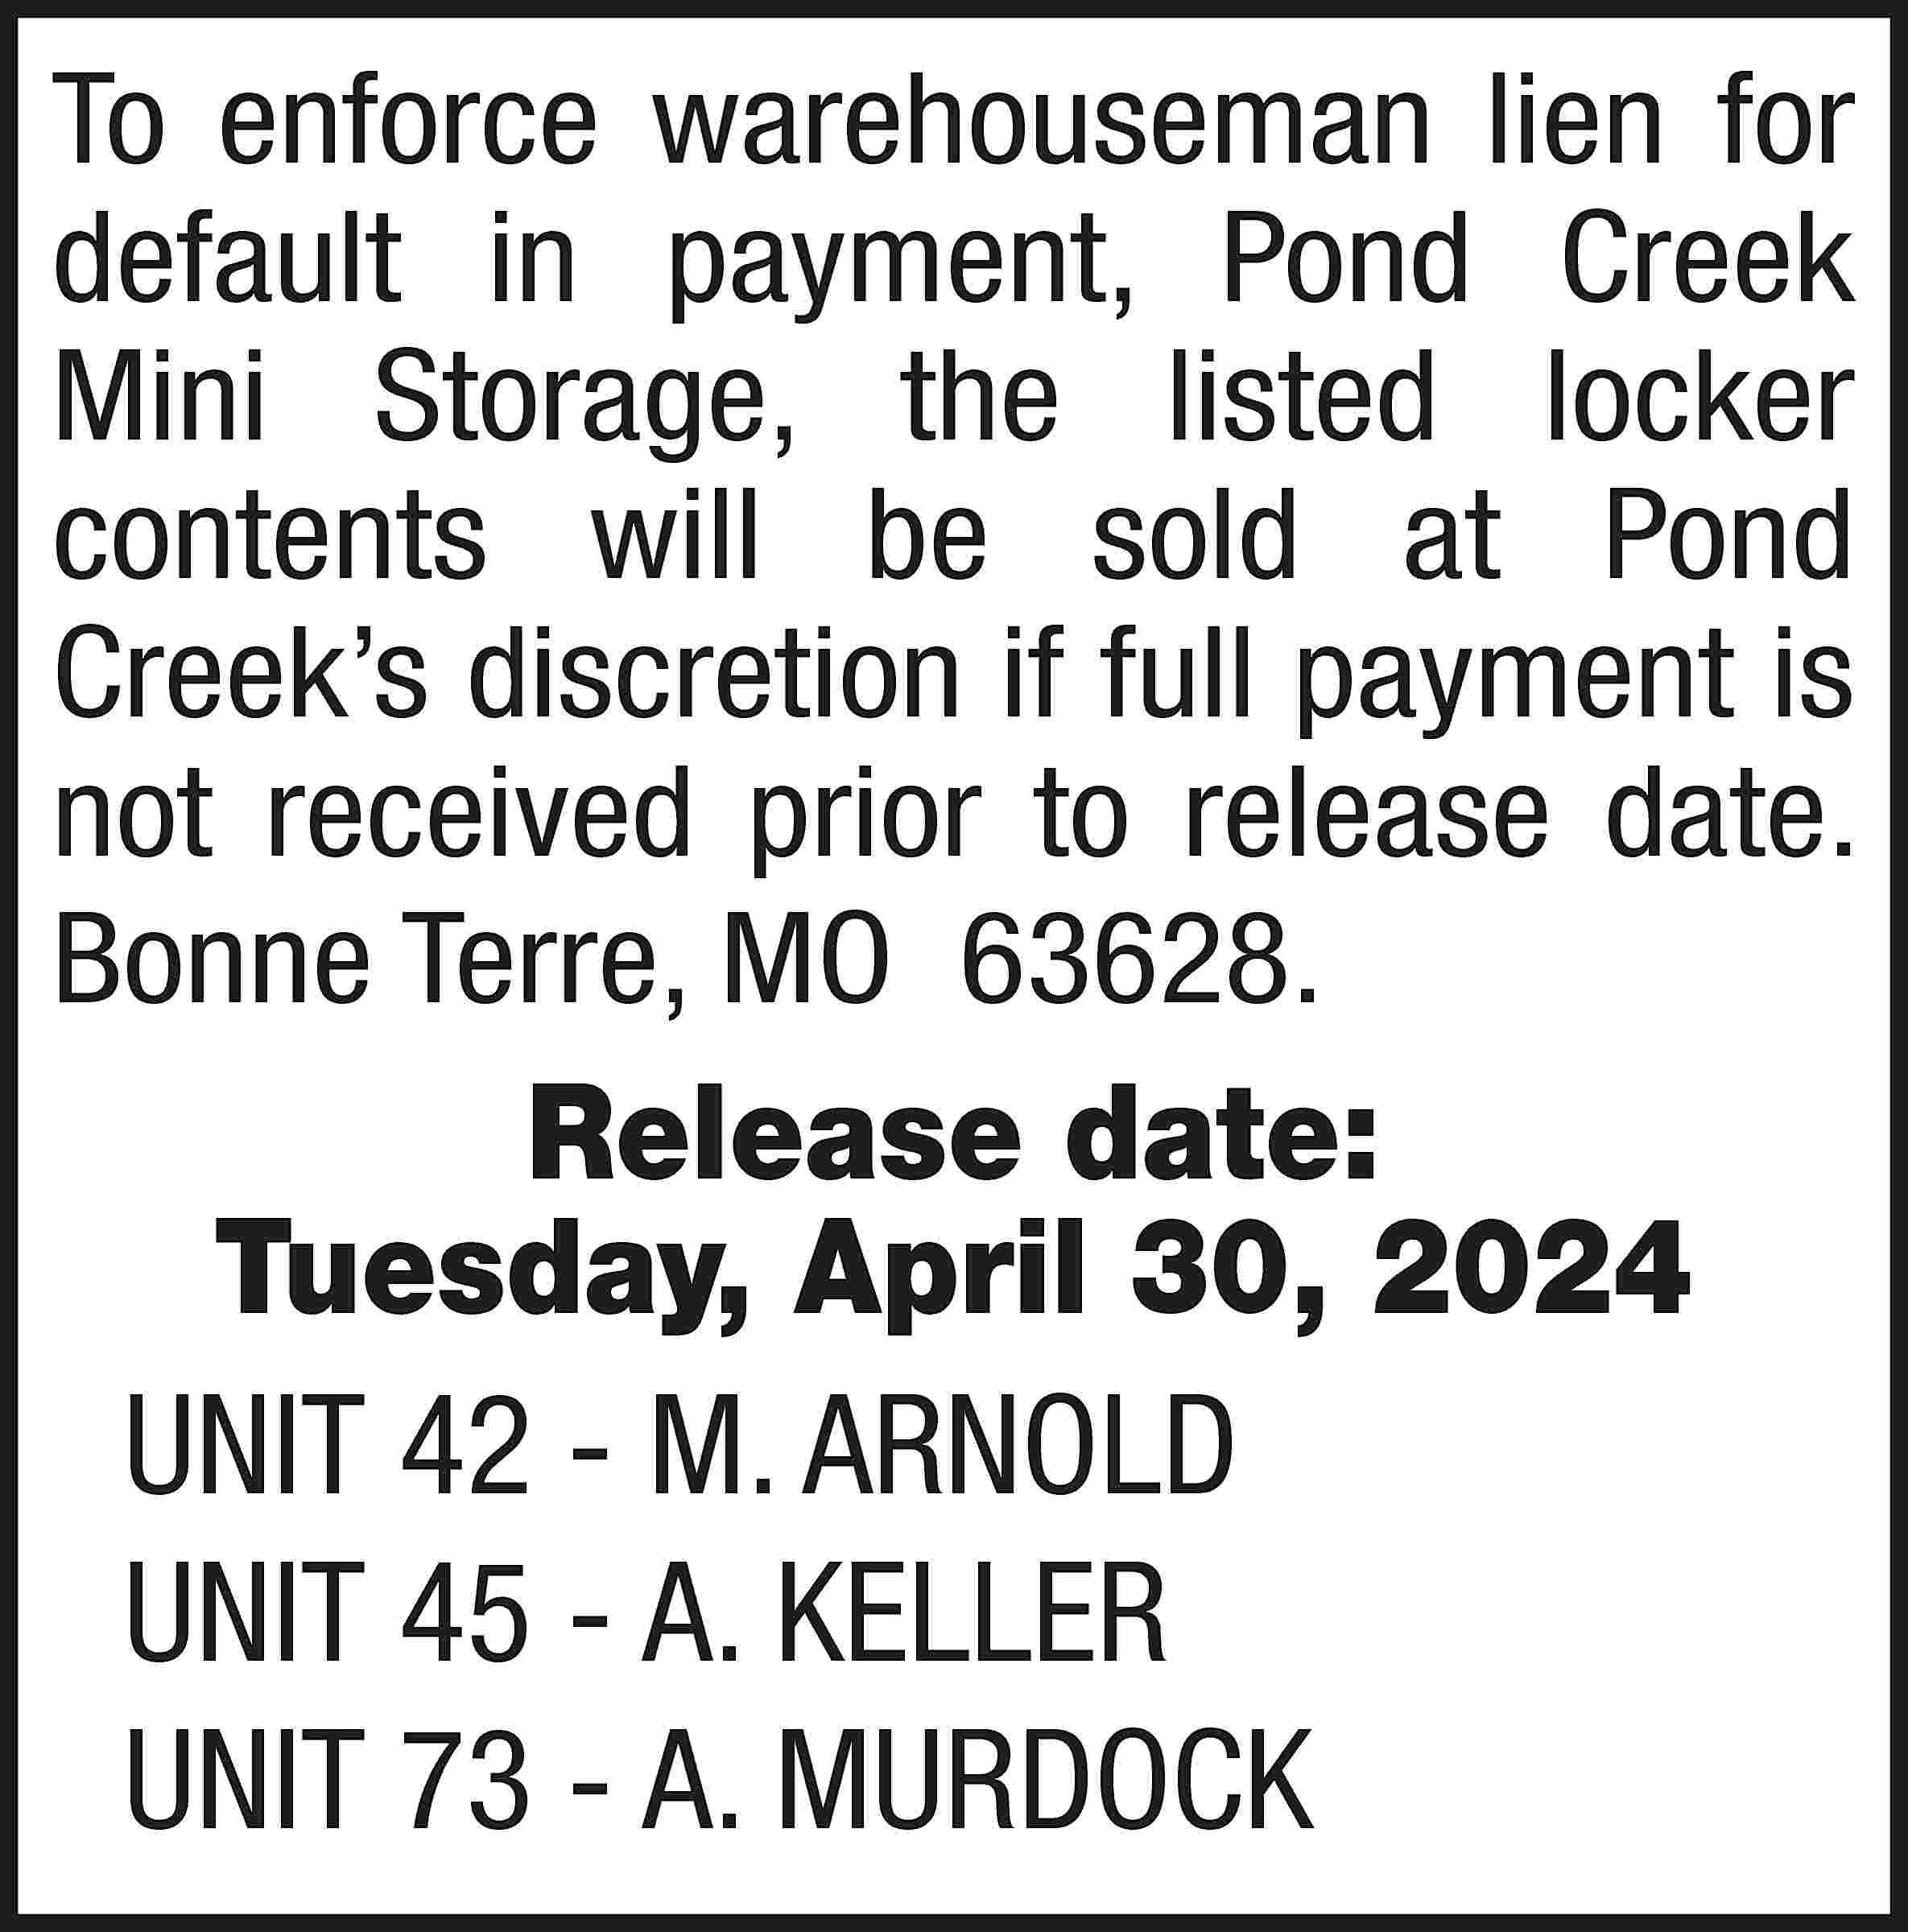 To enforce warehouseman lien for  To enforce warehouseman lien for default in payment, Pond Creek Mini Storage, the listed locker contents will be sold at Pond Creek’s discretion if full payment is not received prior to release date. Bonne Terre, MO 63628. Release date: Tuesday, April 30, 2024 UNIT 42 - M. ARNOLD UNIT 45 - A. KELLER UNIT 73 - A. MURDOCK